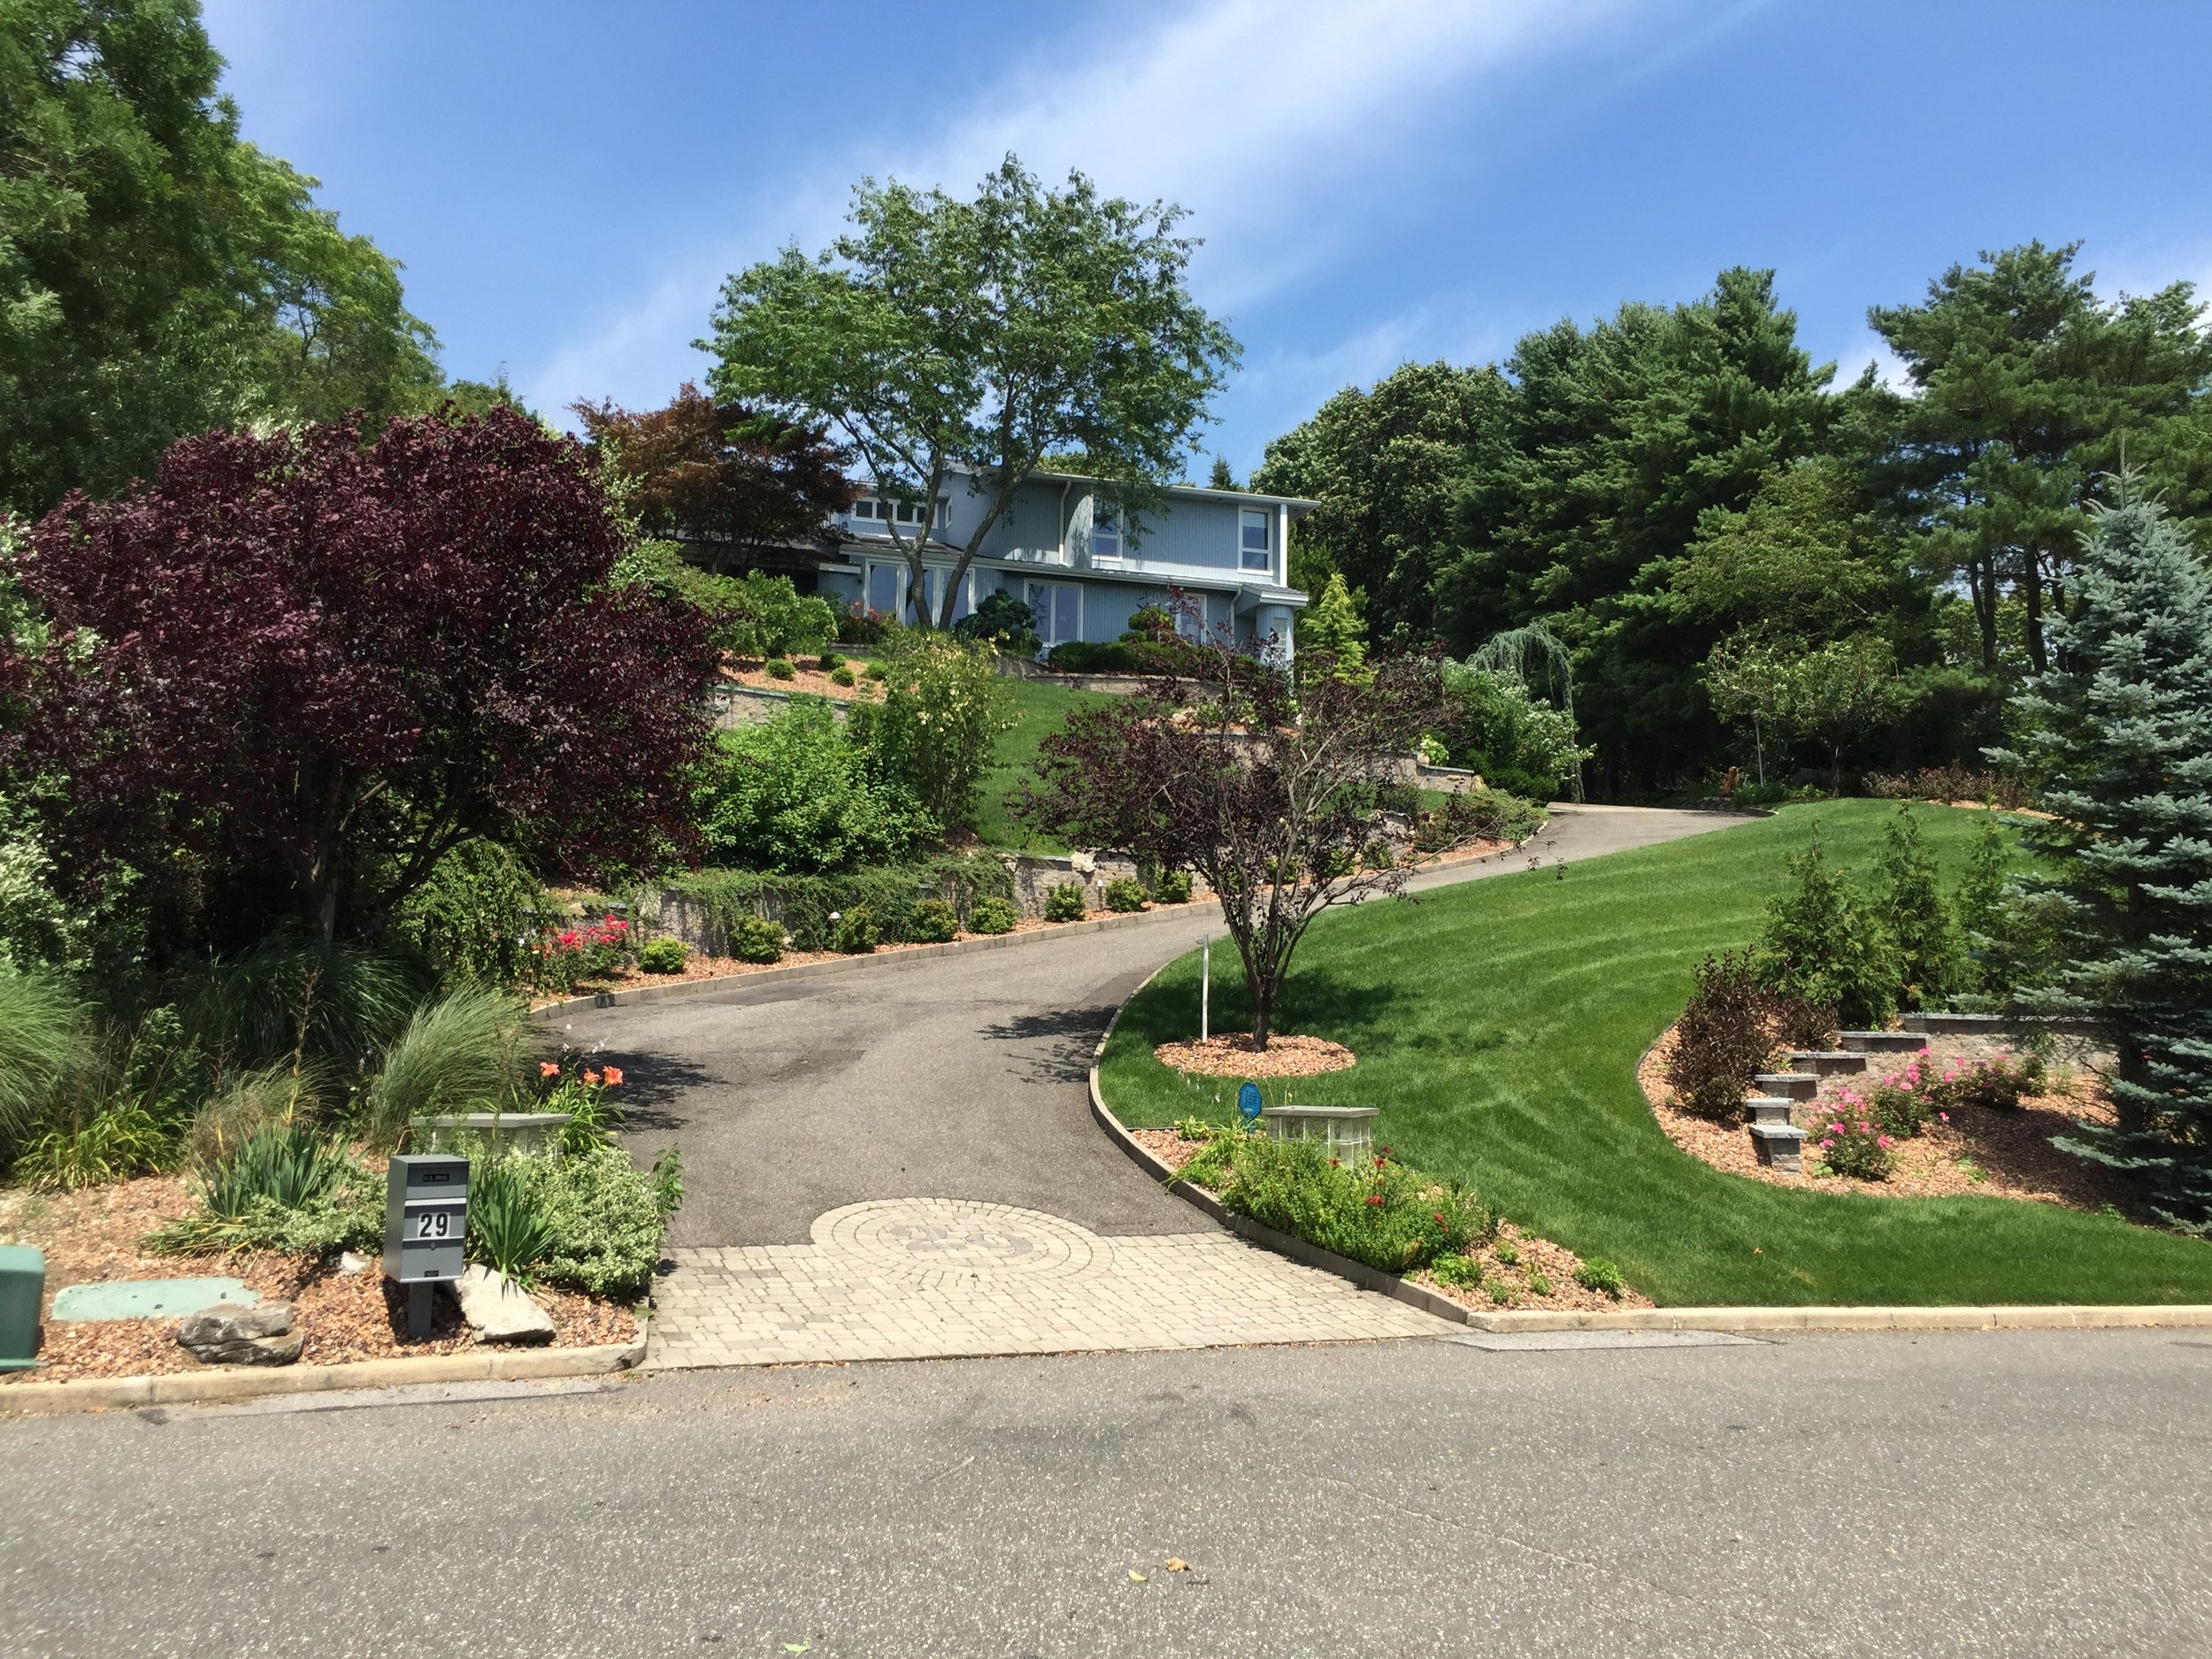 Landscape design with paved driveway in Long Island, NY​​​​​​​